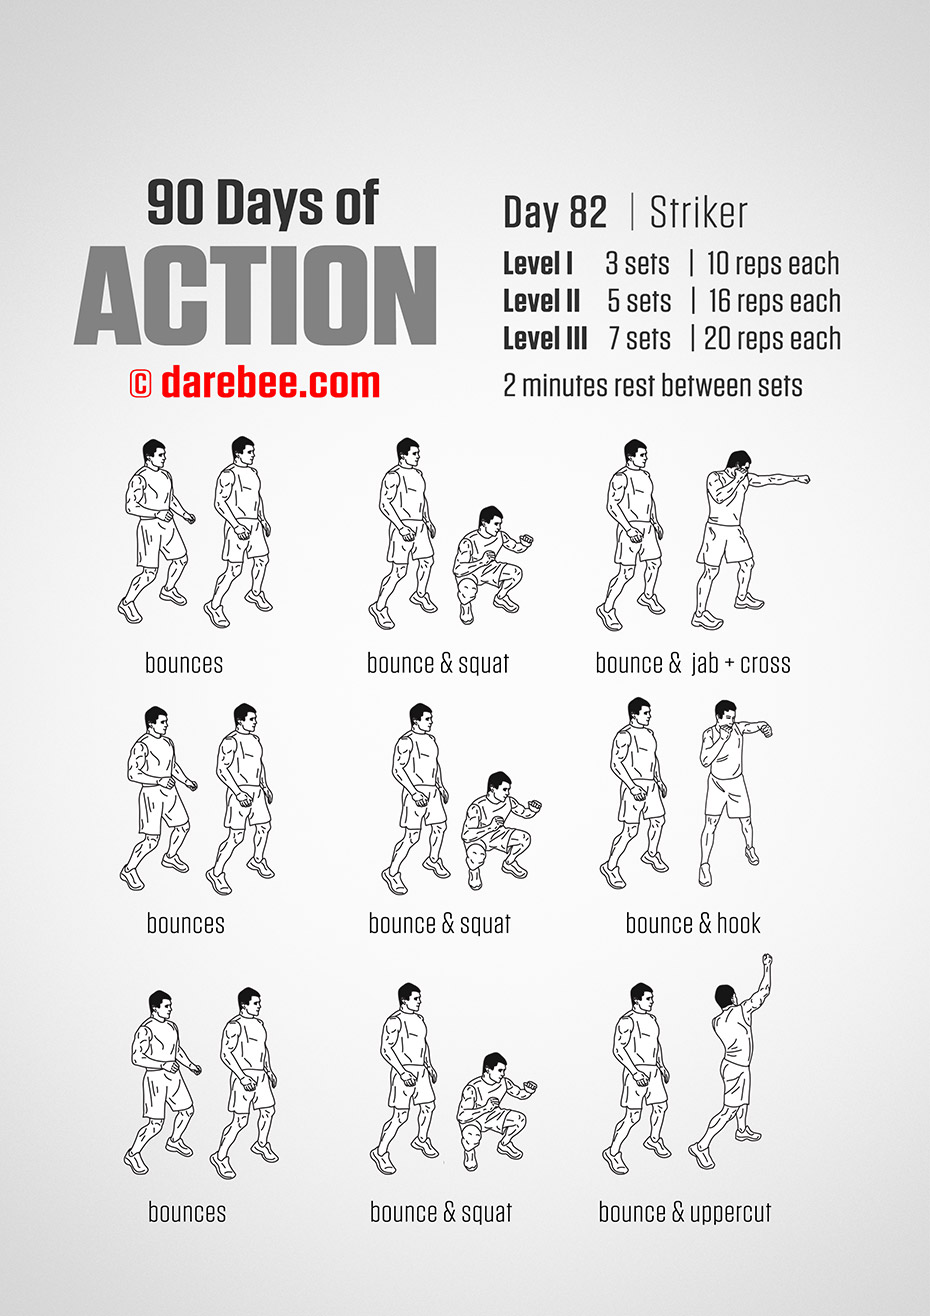 90 Days of Action by DAREBEE